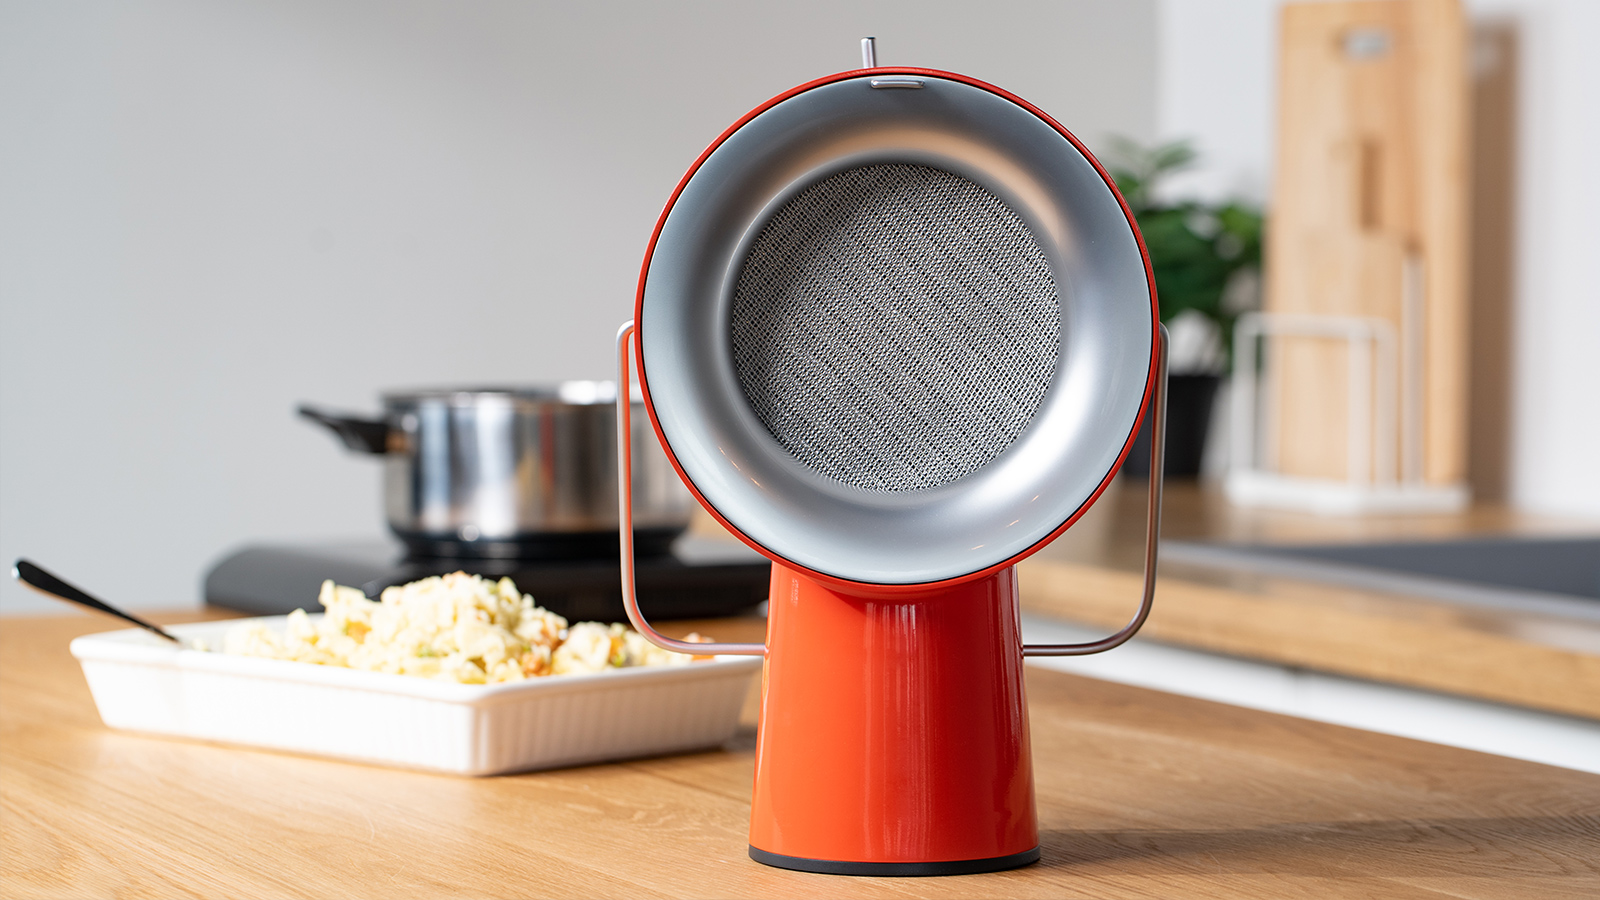 Filter Harmful Cooking Particles In The Kitchen With The AirHood